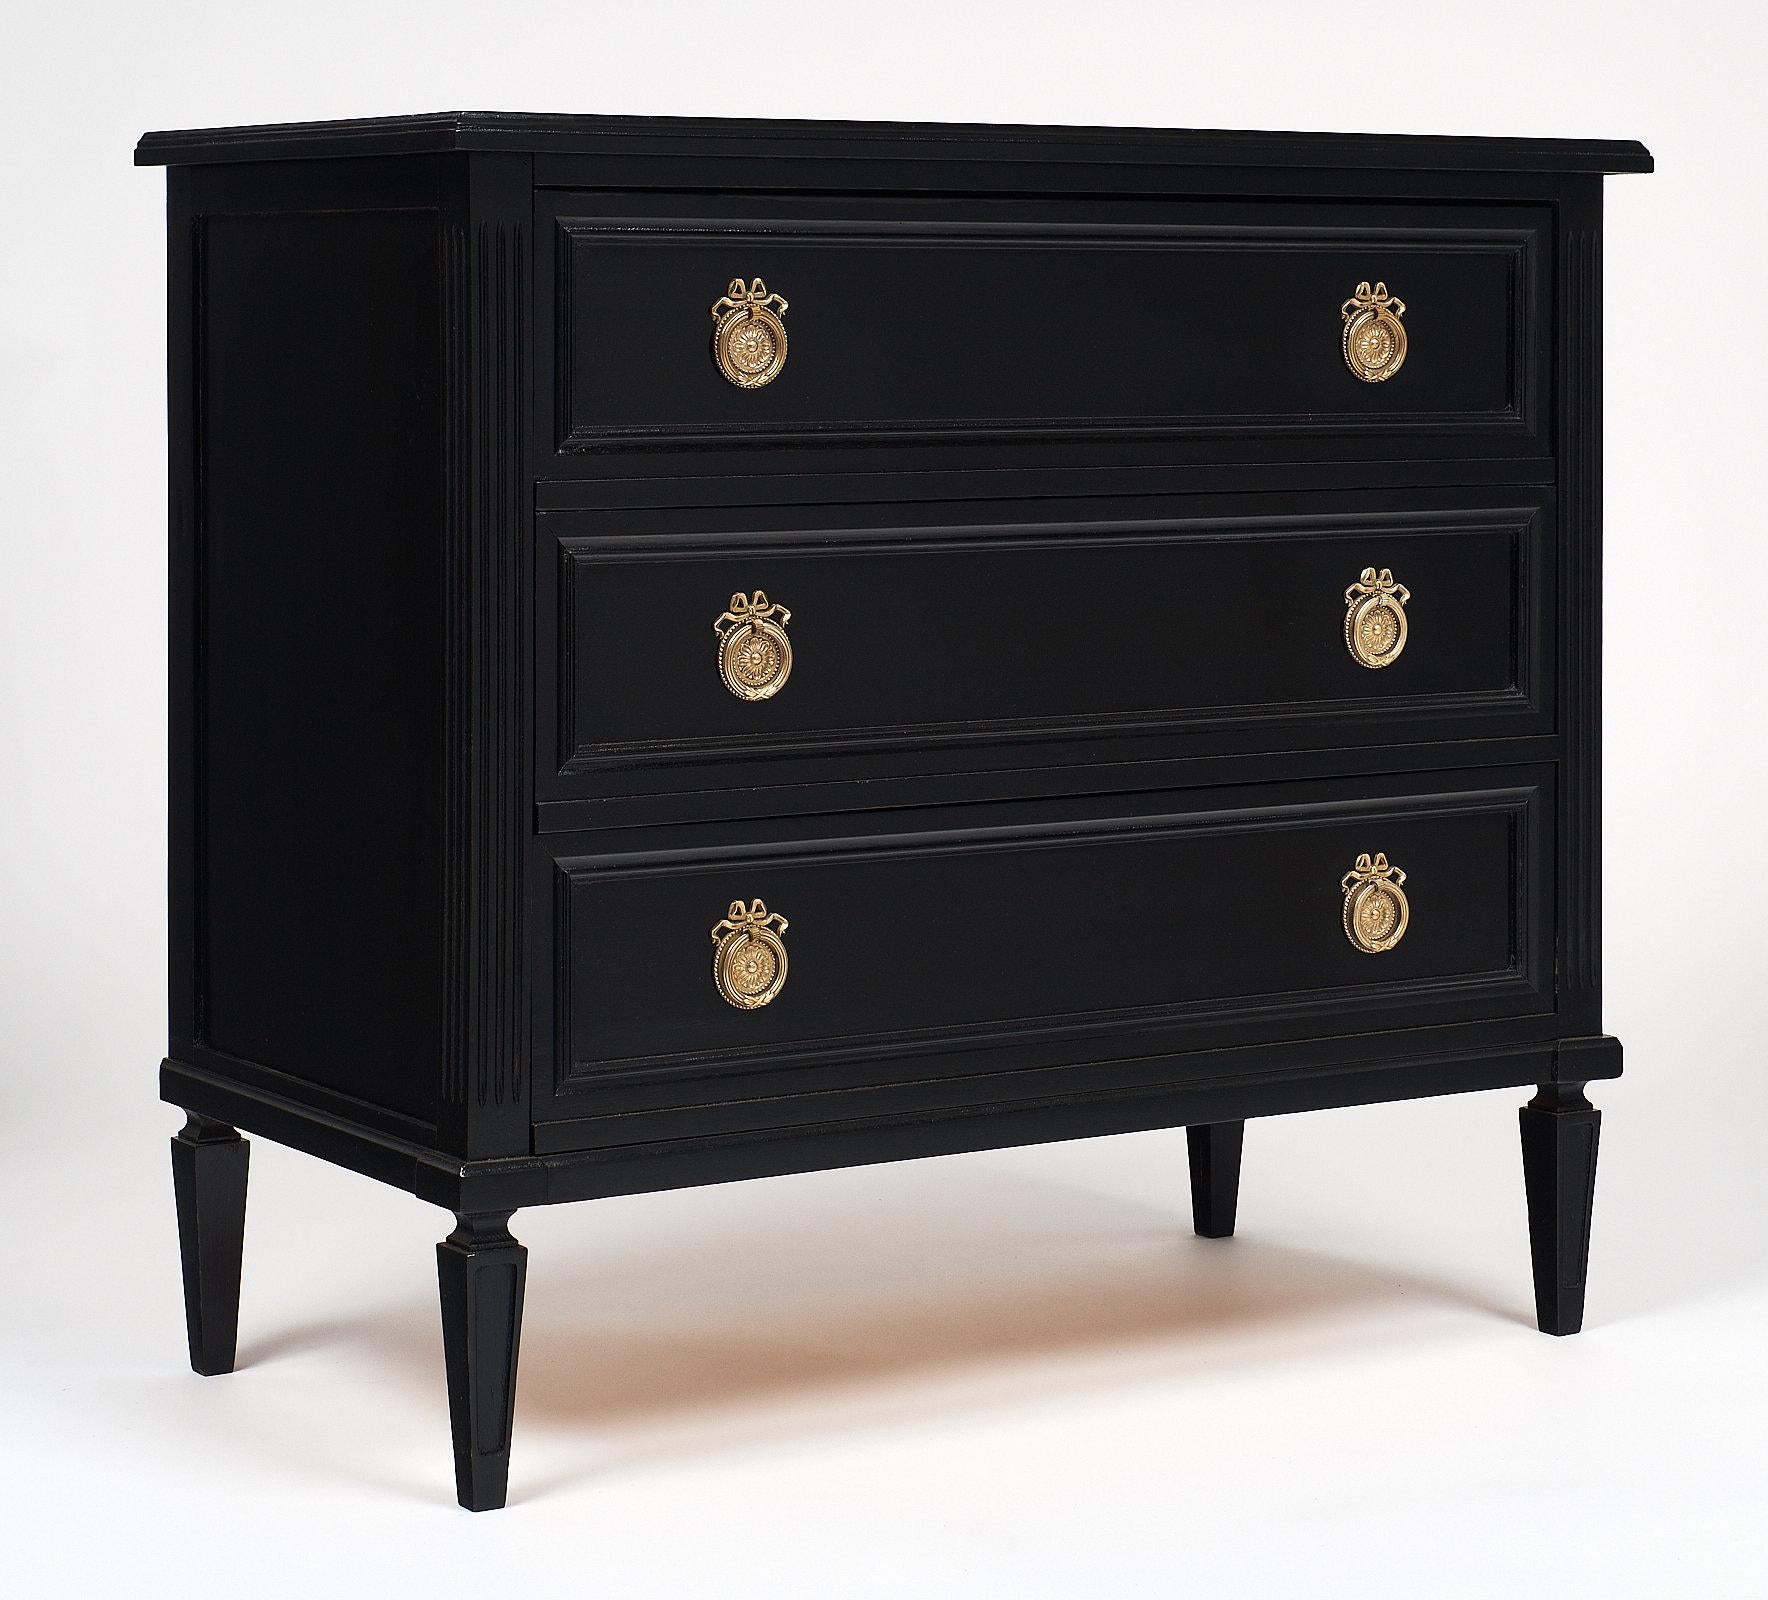 Directoire style French ebonized chest made of solid mahogany and featuring gilt brass hardware. We loved the perfect proportions of this lovely piece, with three dovetailed drawers and tapered legs. It has been finished with a French polish for a